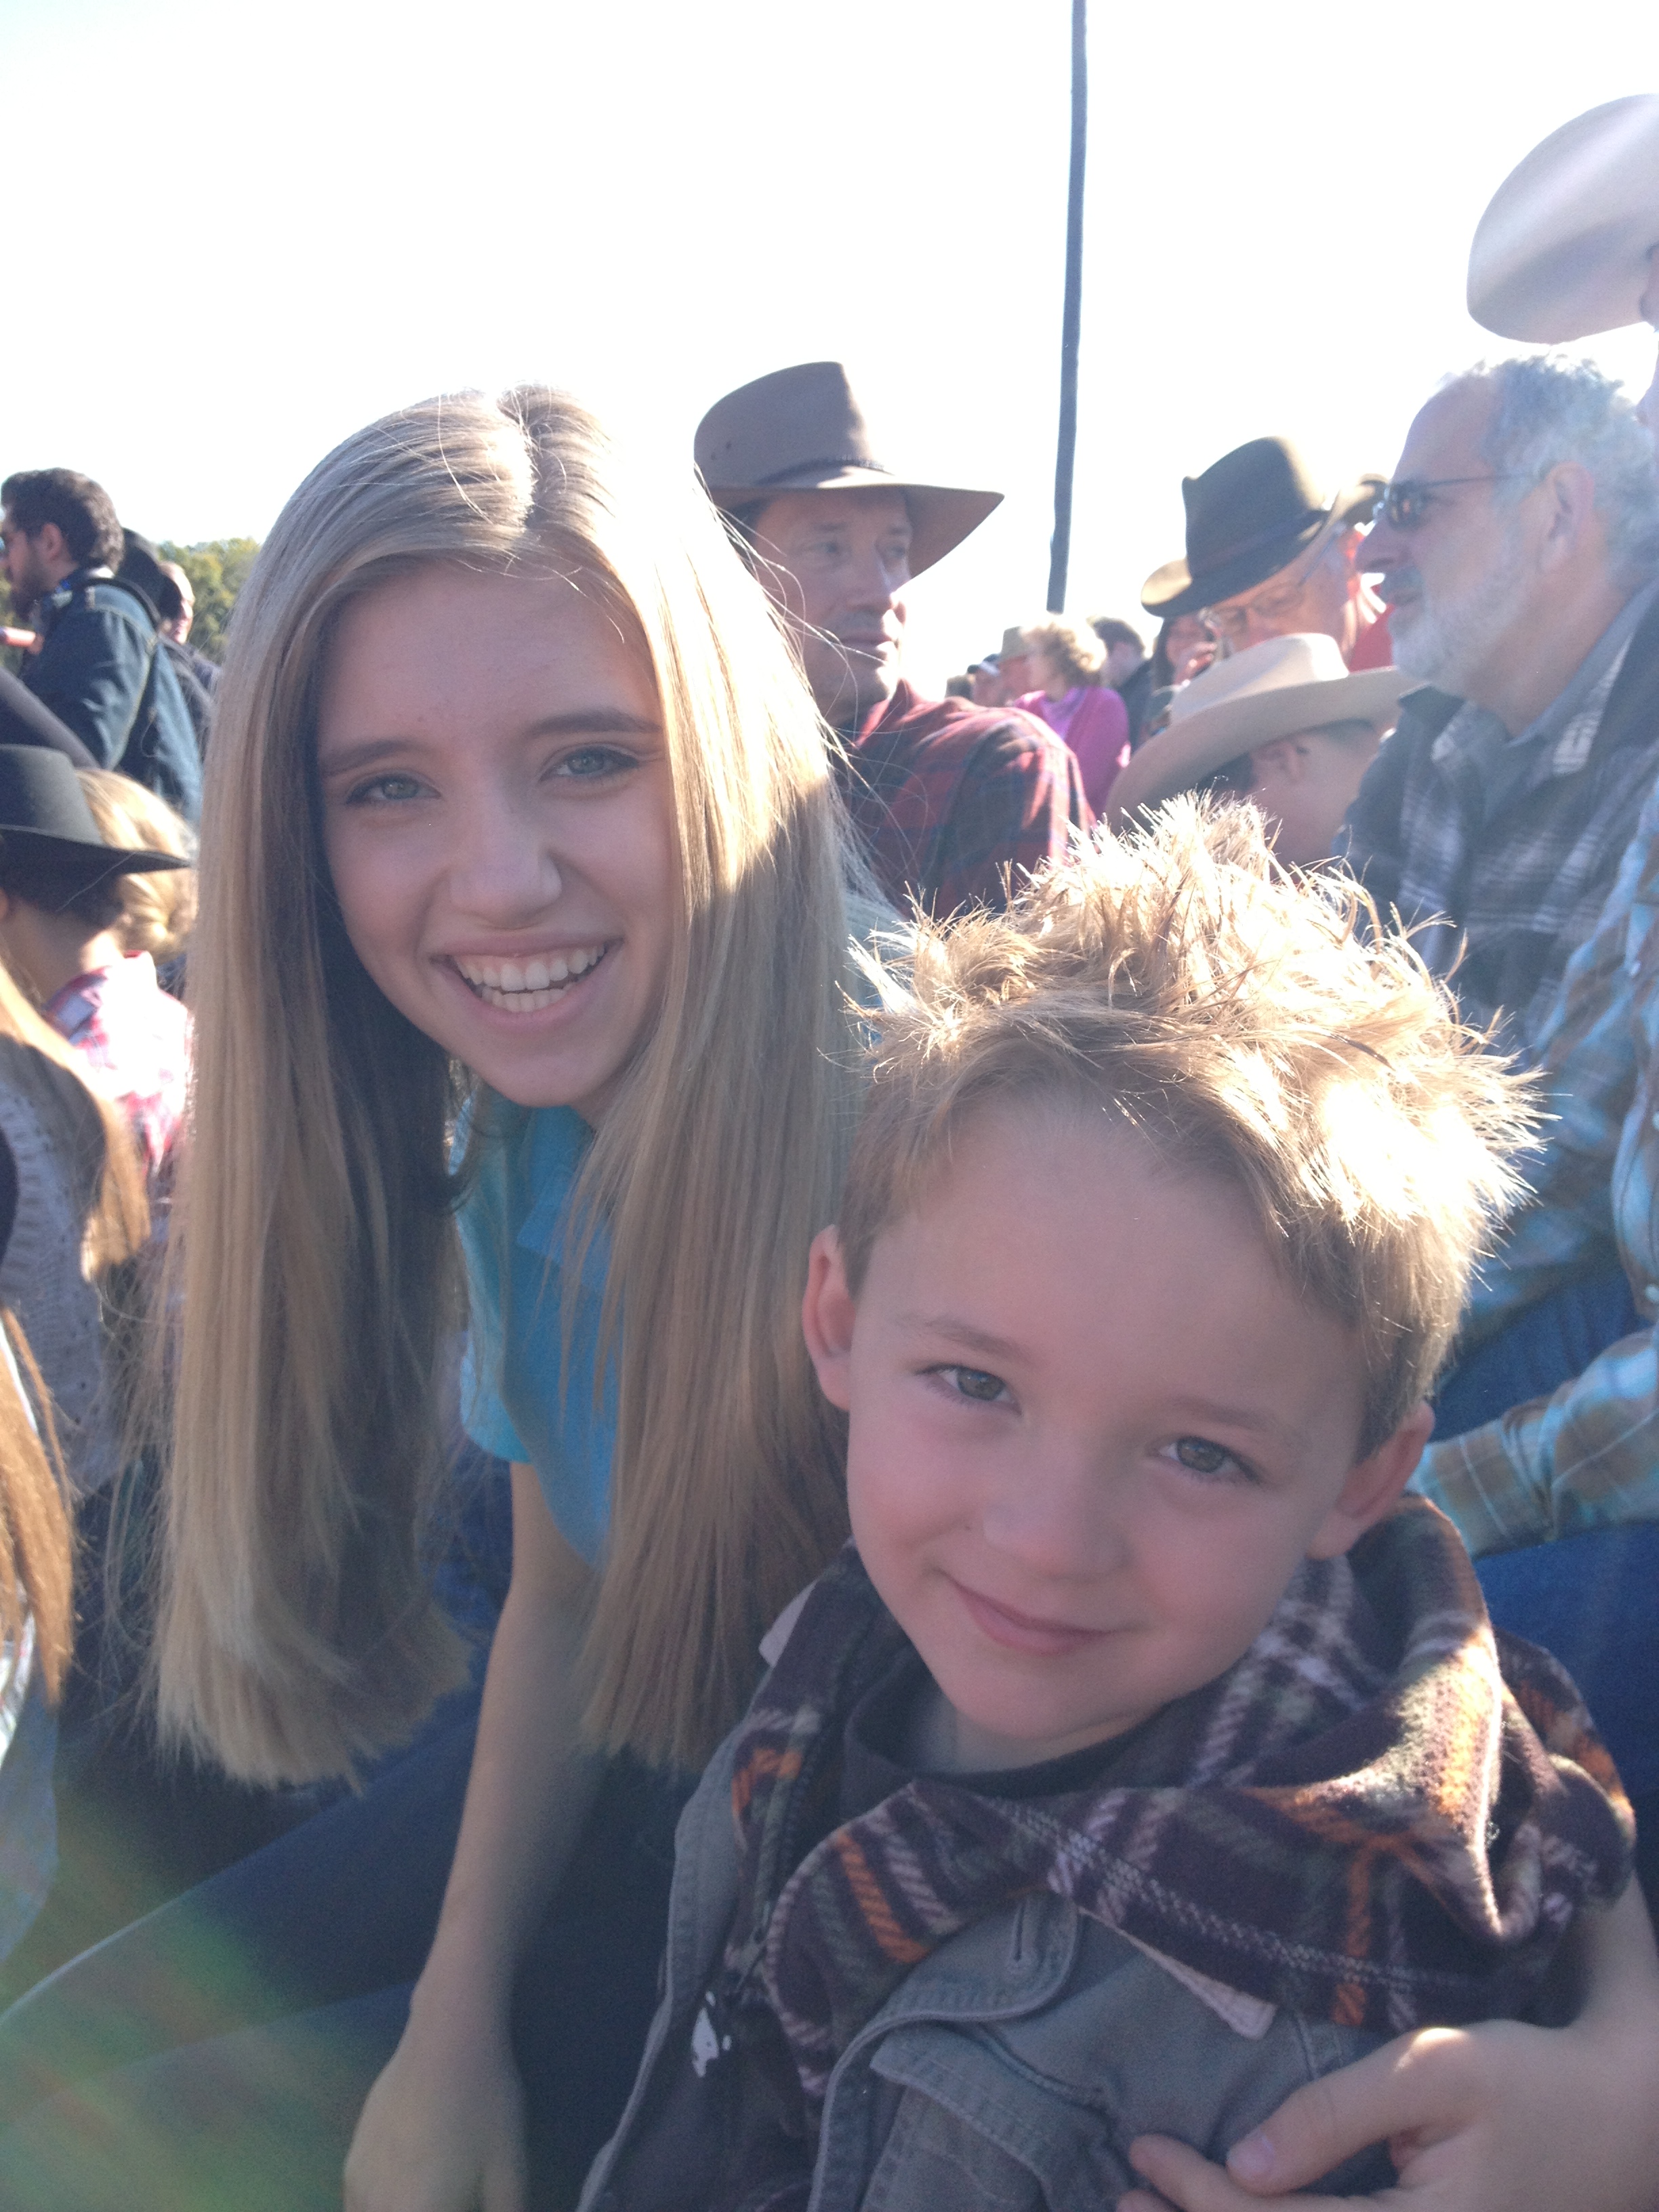 Rodeo Girl with Sophie Bolen, star of 